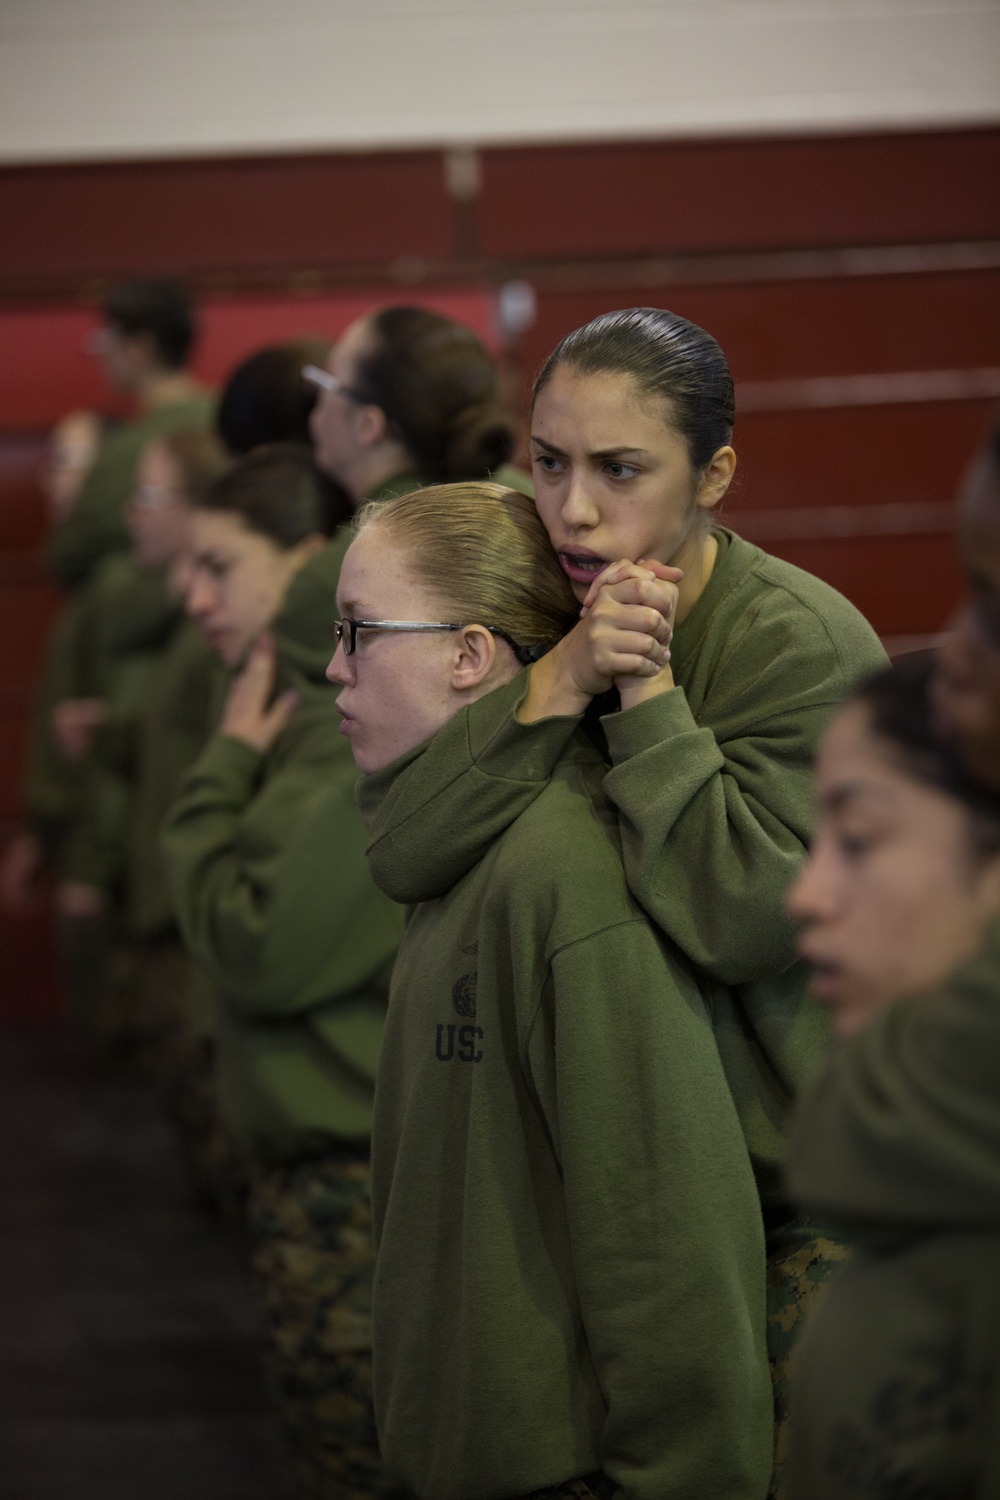 Parris Island recruits learn Marine Corps martial arts to fight with honor